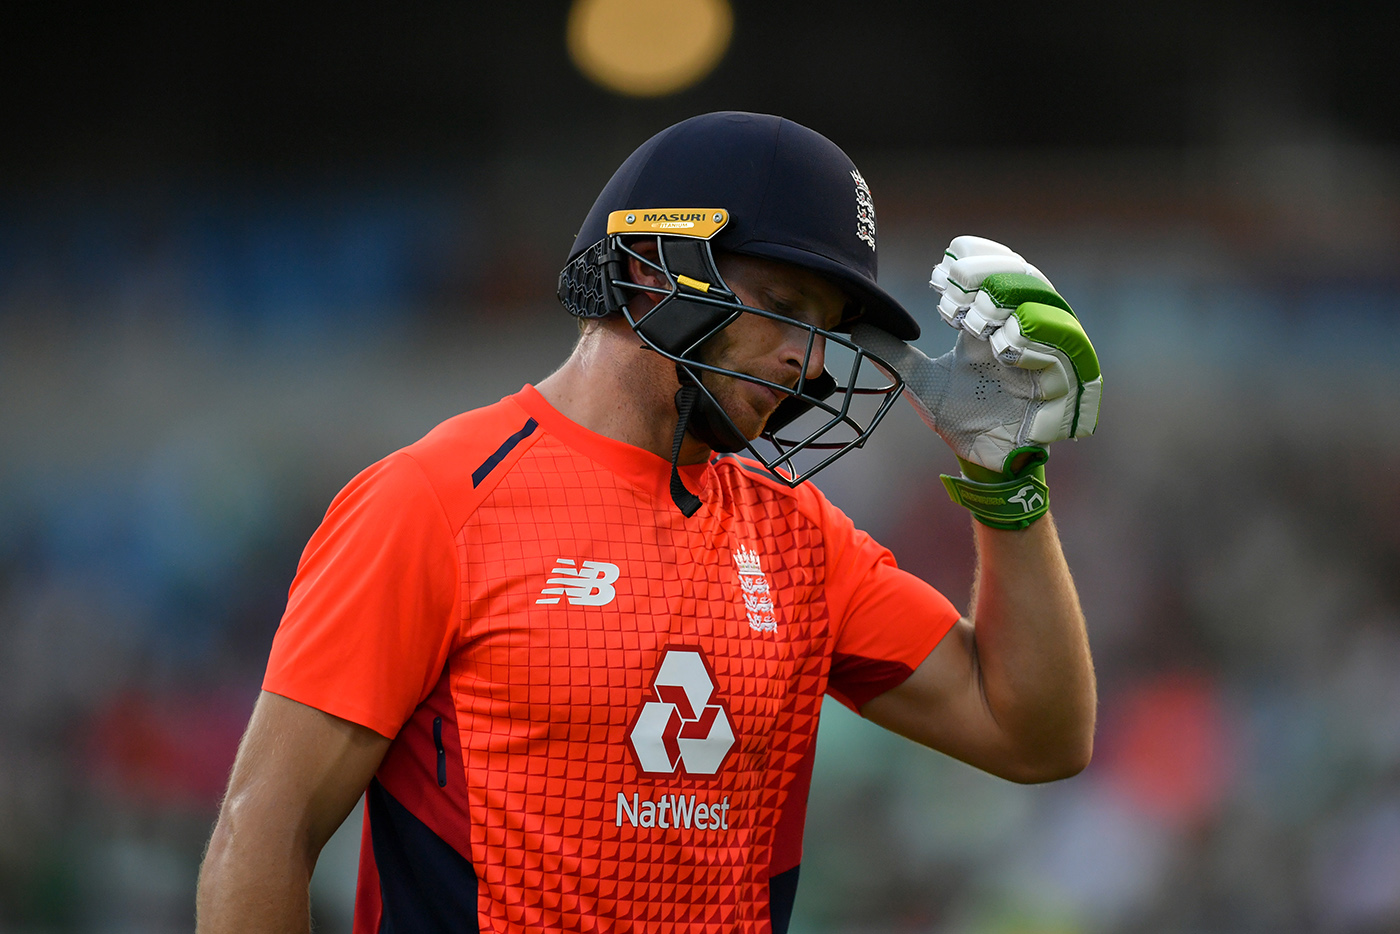 “It’s Quite A Unique Situation” – Jos Buttler On The Disparity In Pay